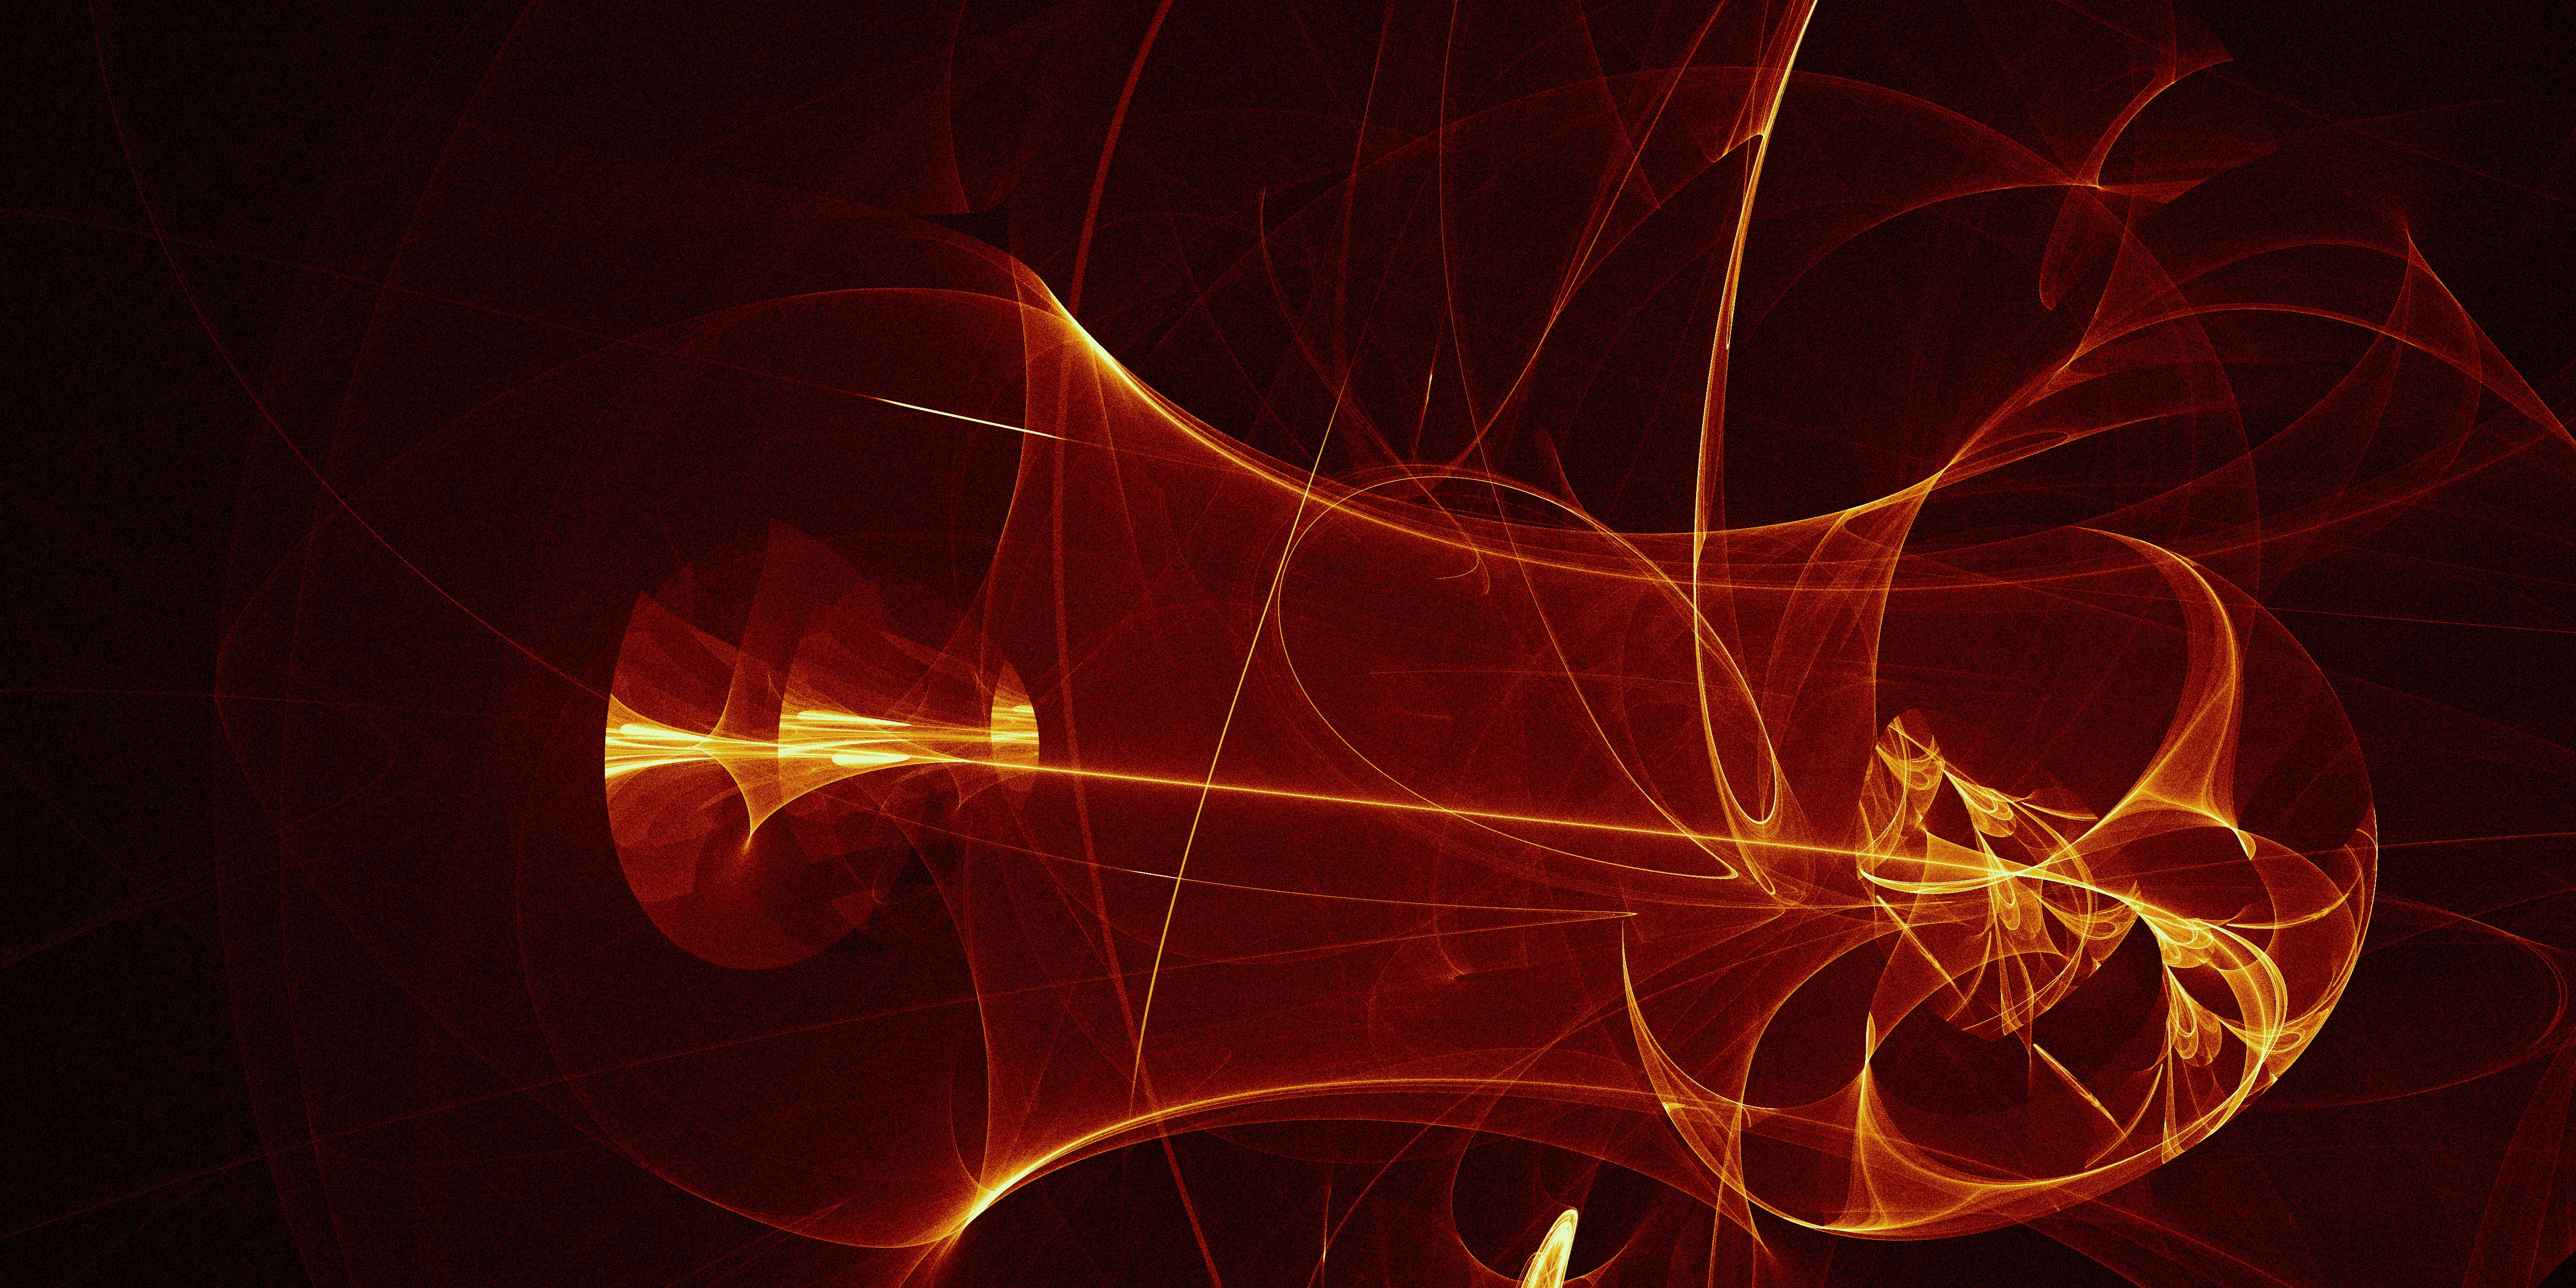 Abstract Fractal Art Wallpaper, Abstract, Art, Surreal, Style, HQ Photo